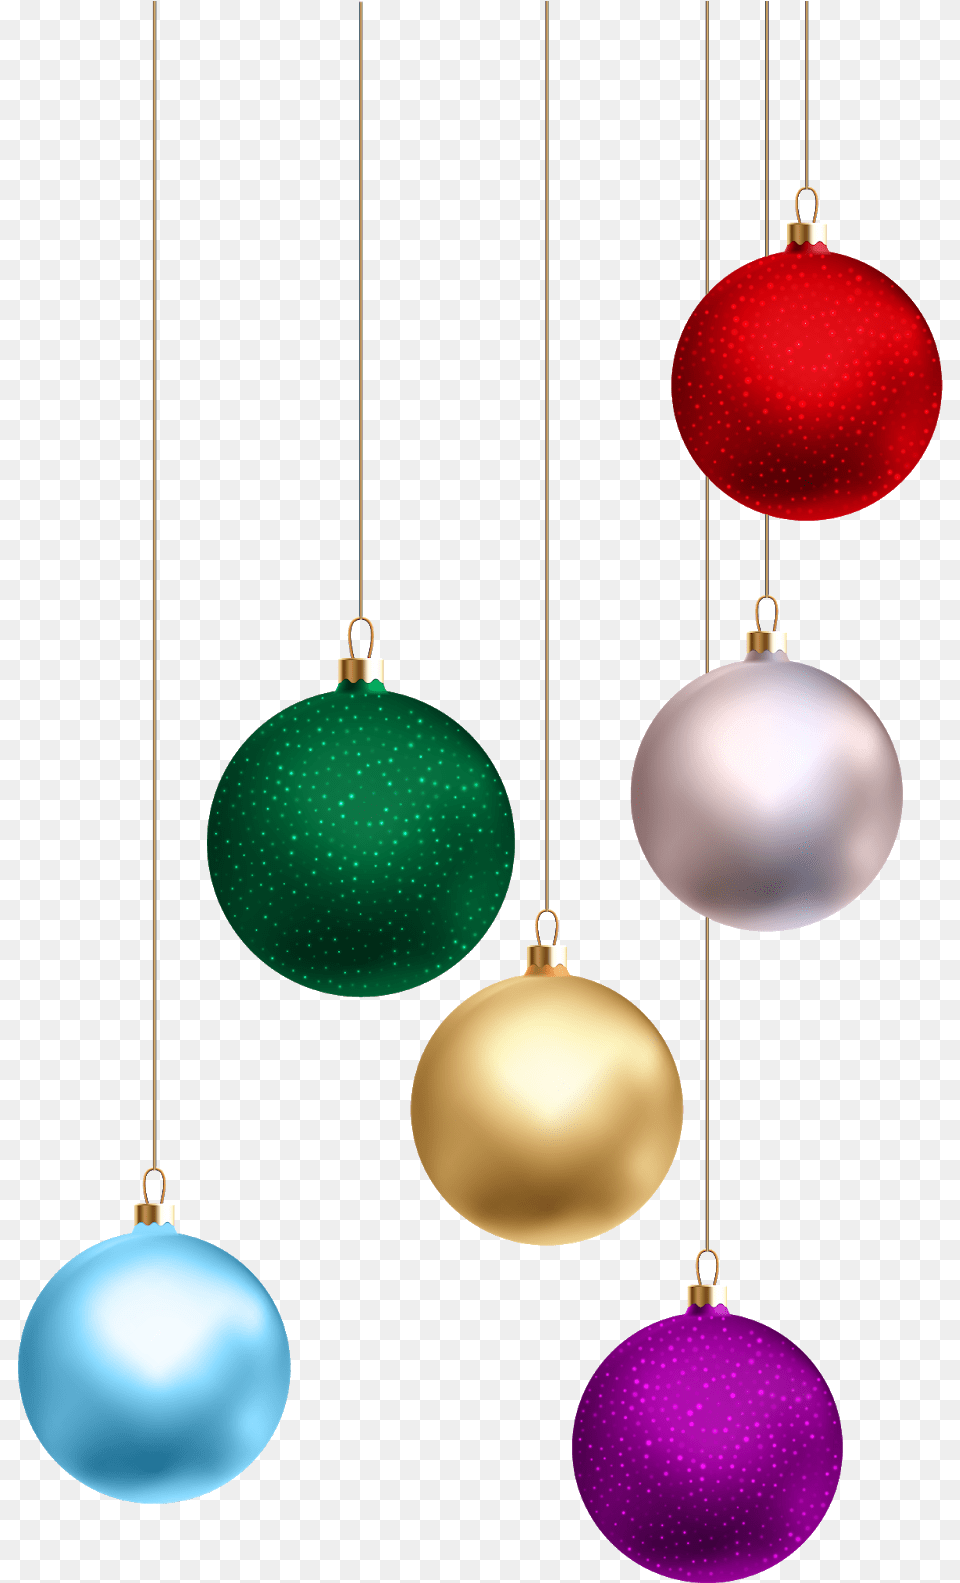 Christmas Hanging Ball Christmas Balls Transparent Background, Lighting, Accessories Png Image